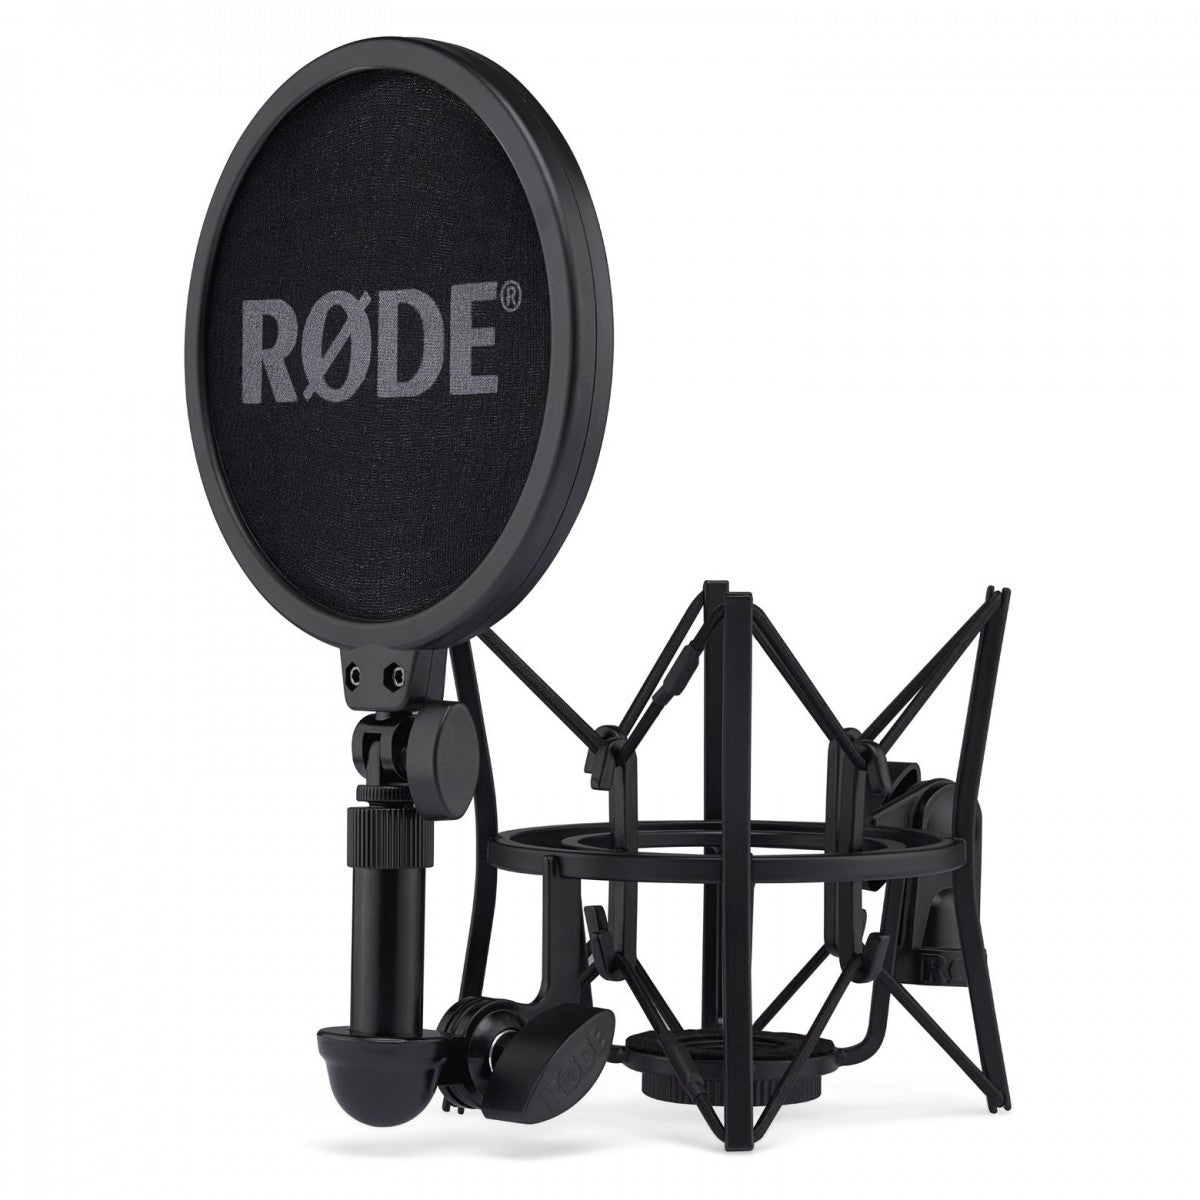 RØDE Releases New Edition Of NT1 Studio Condenser Microphone